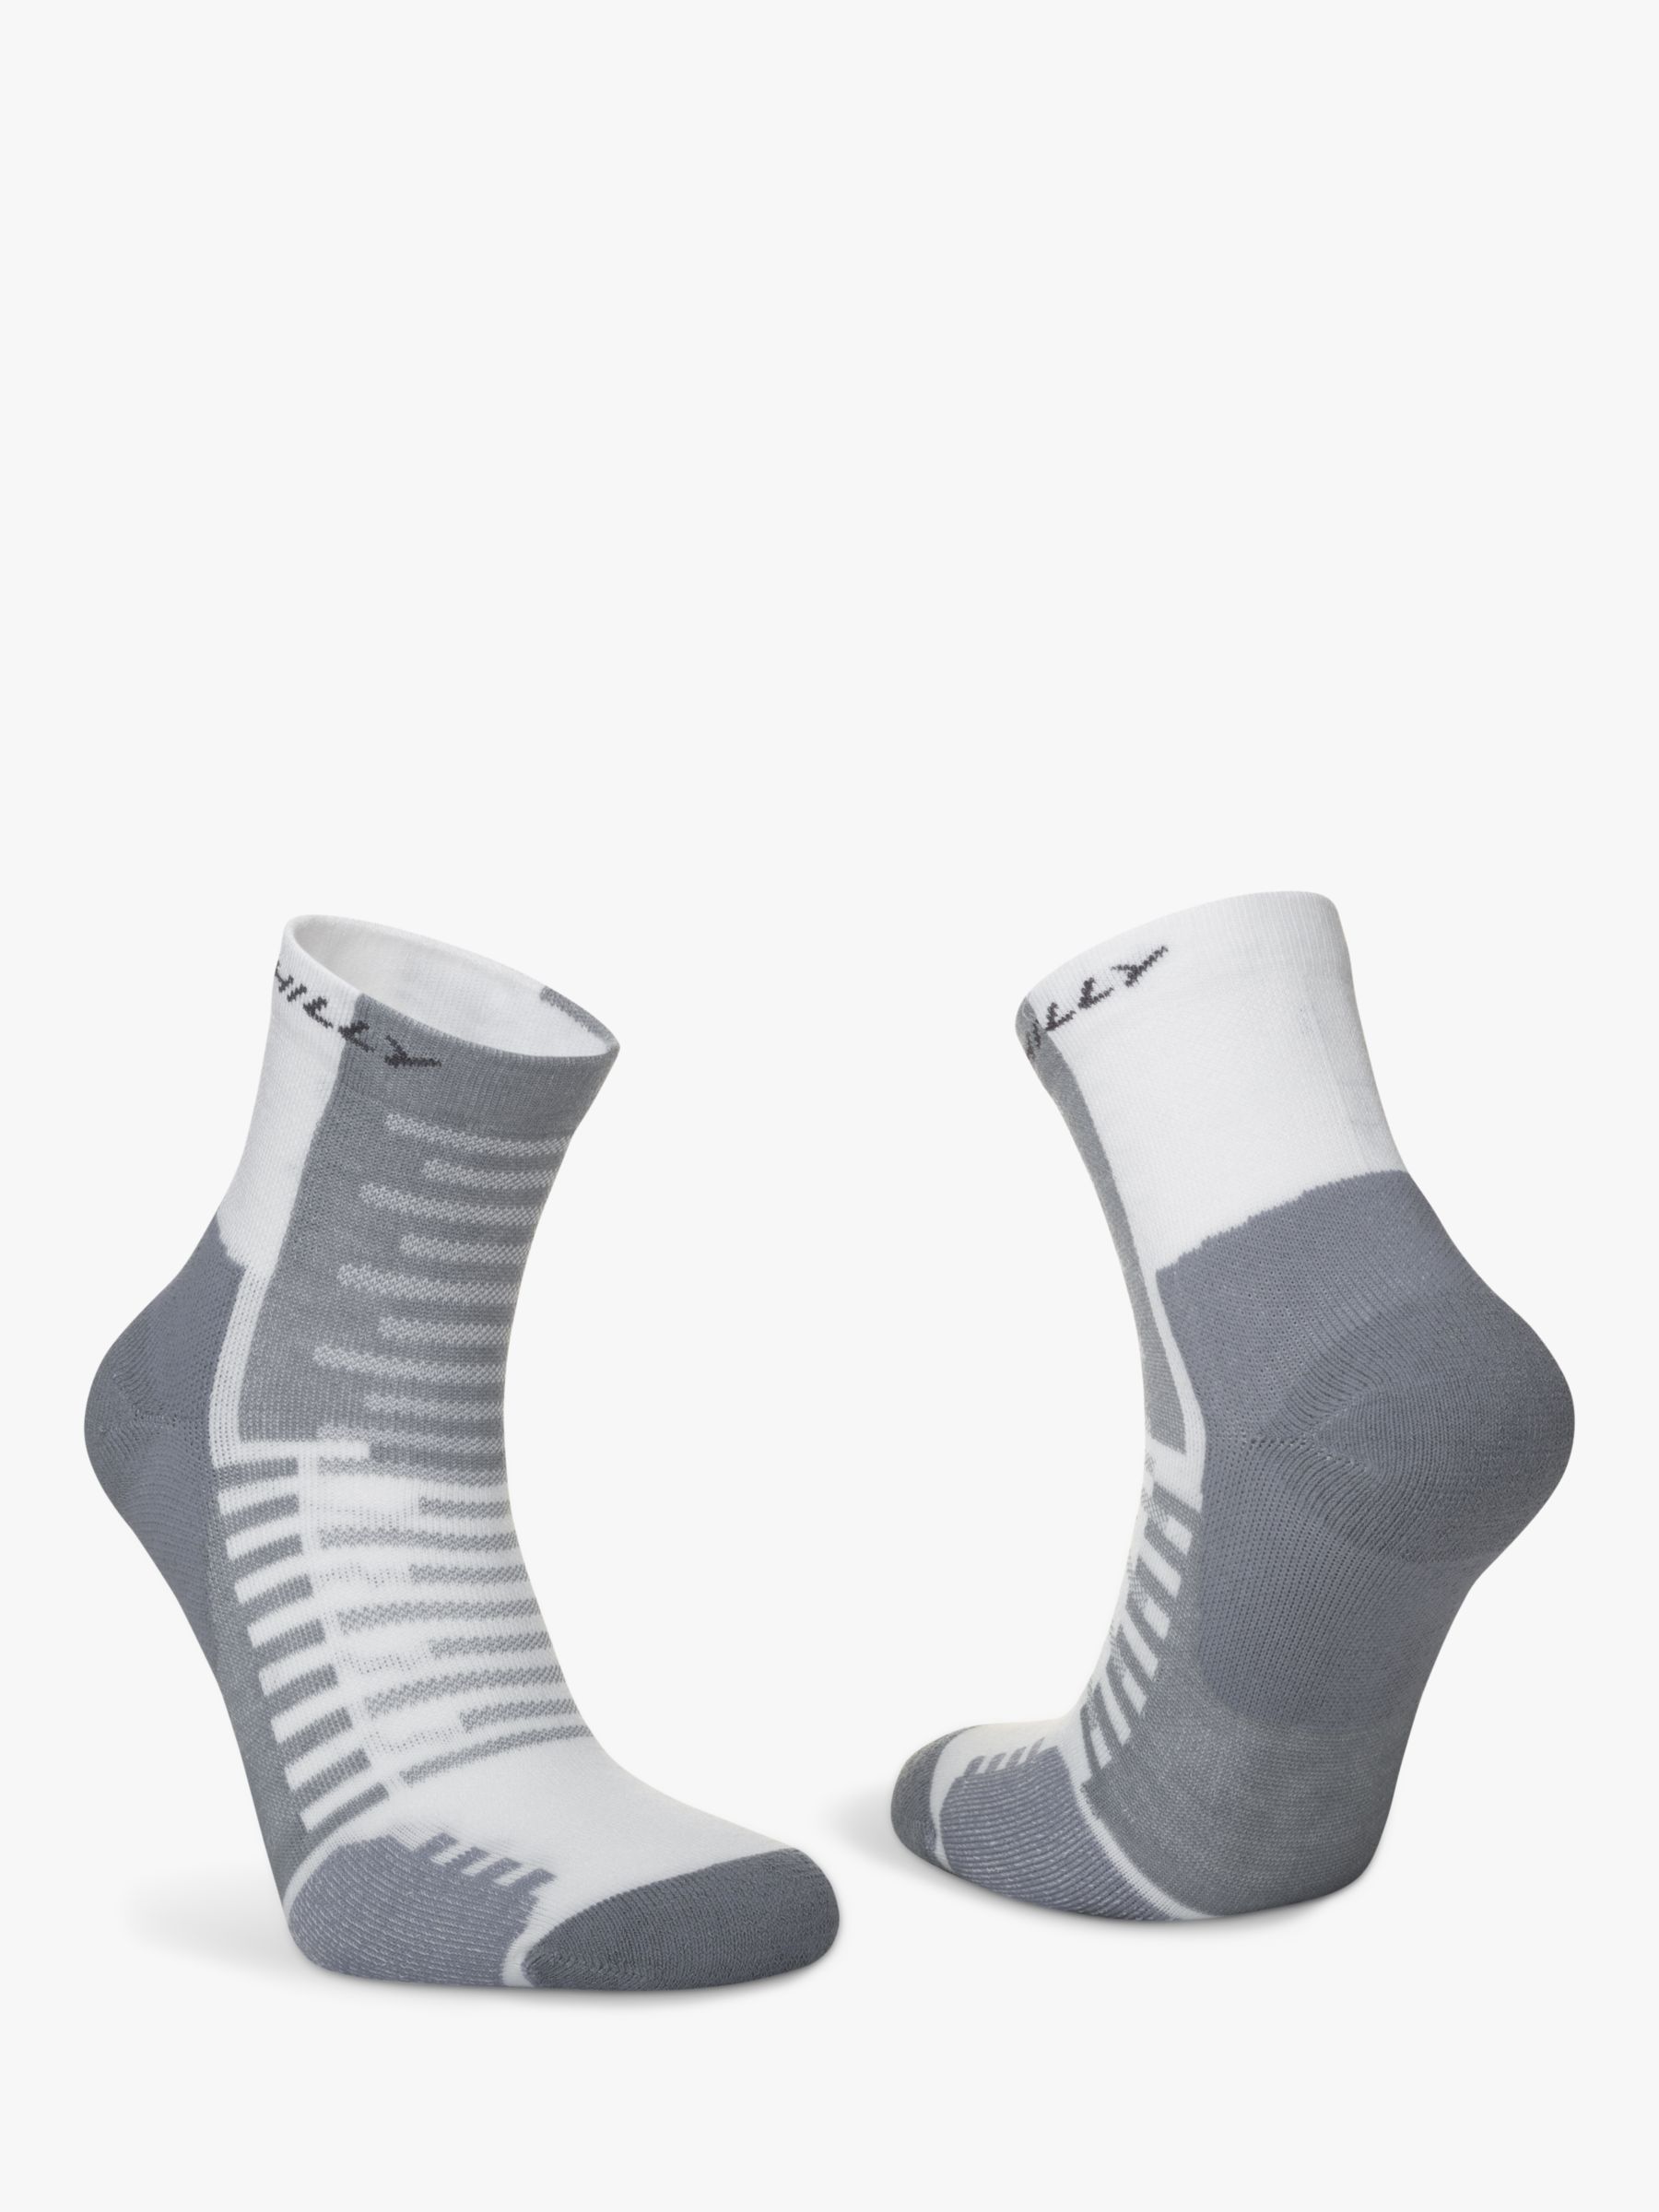 Hilly Active Ankle Running Socks, White/Grey, S